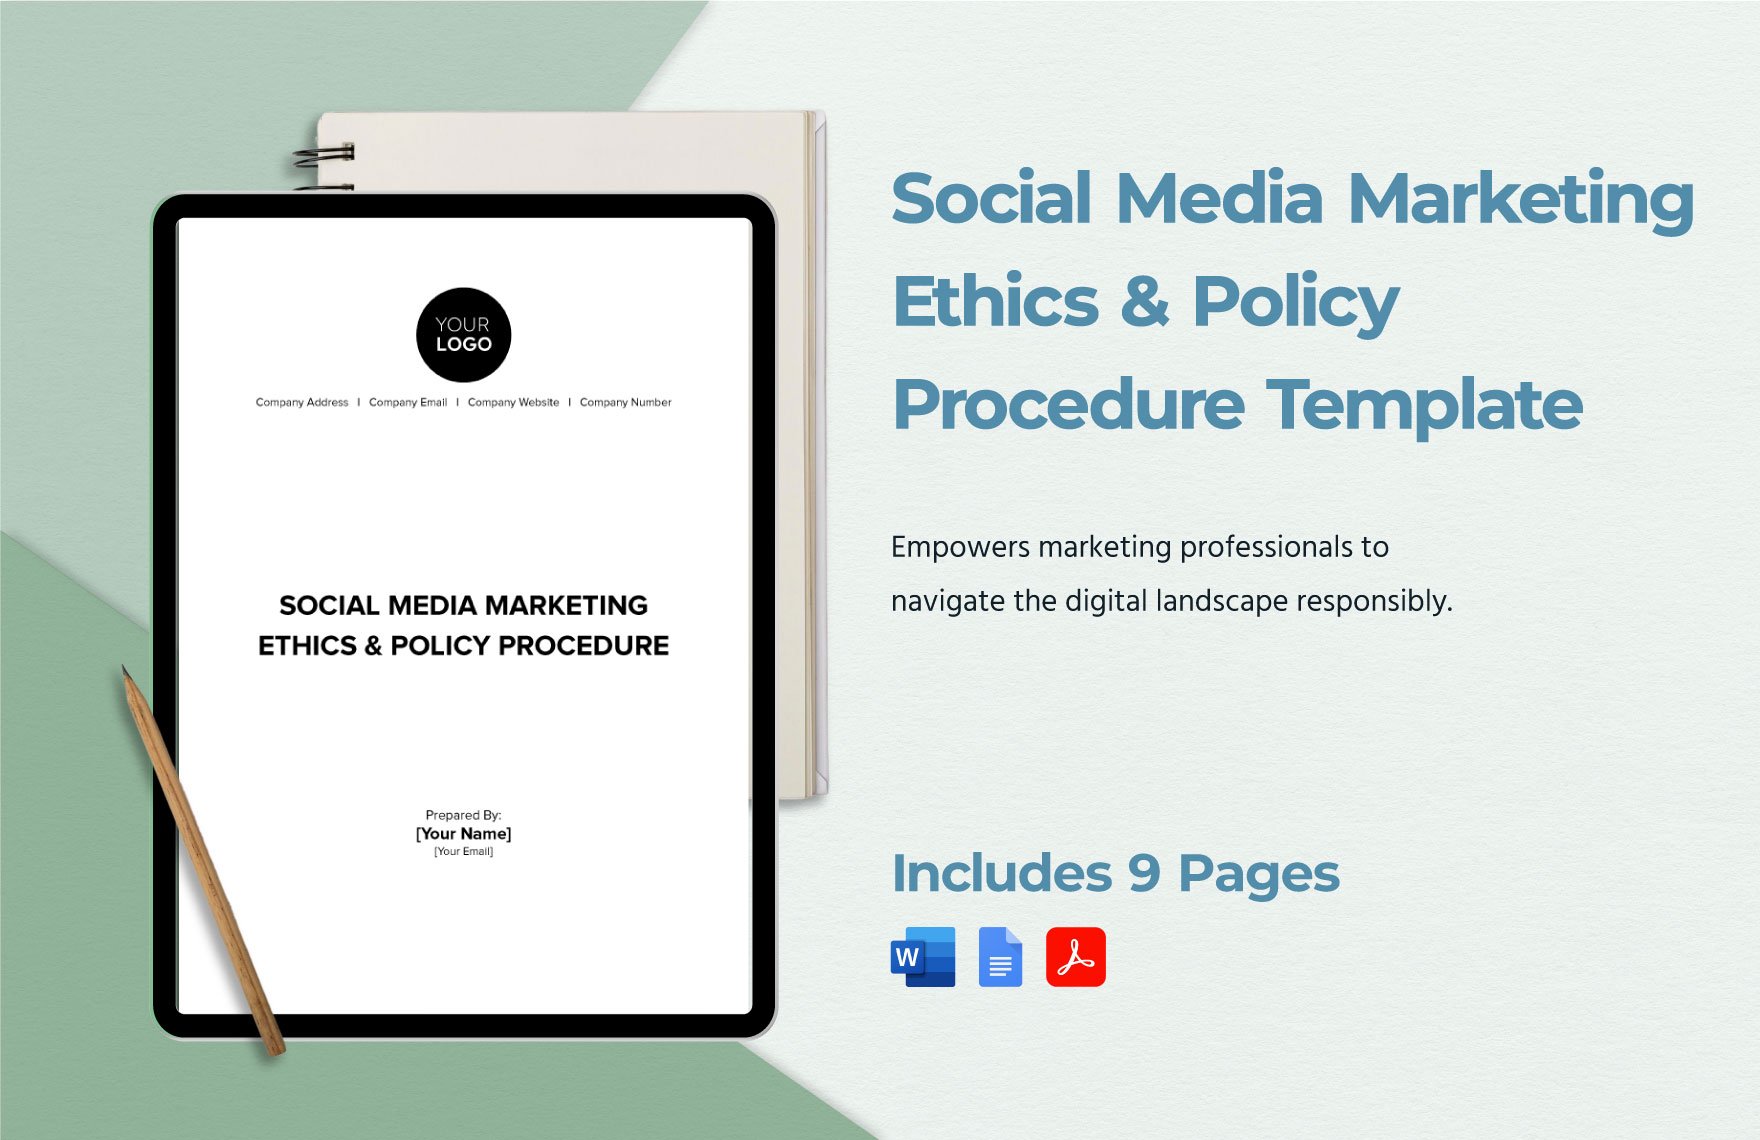 Social Media Marketing Ethics & Policy Procedure Template